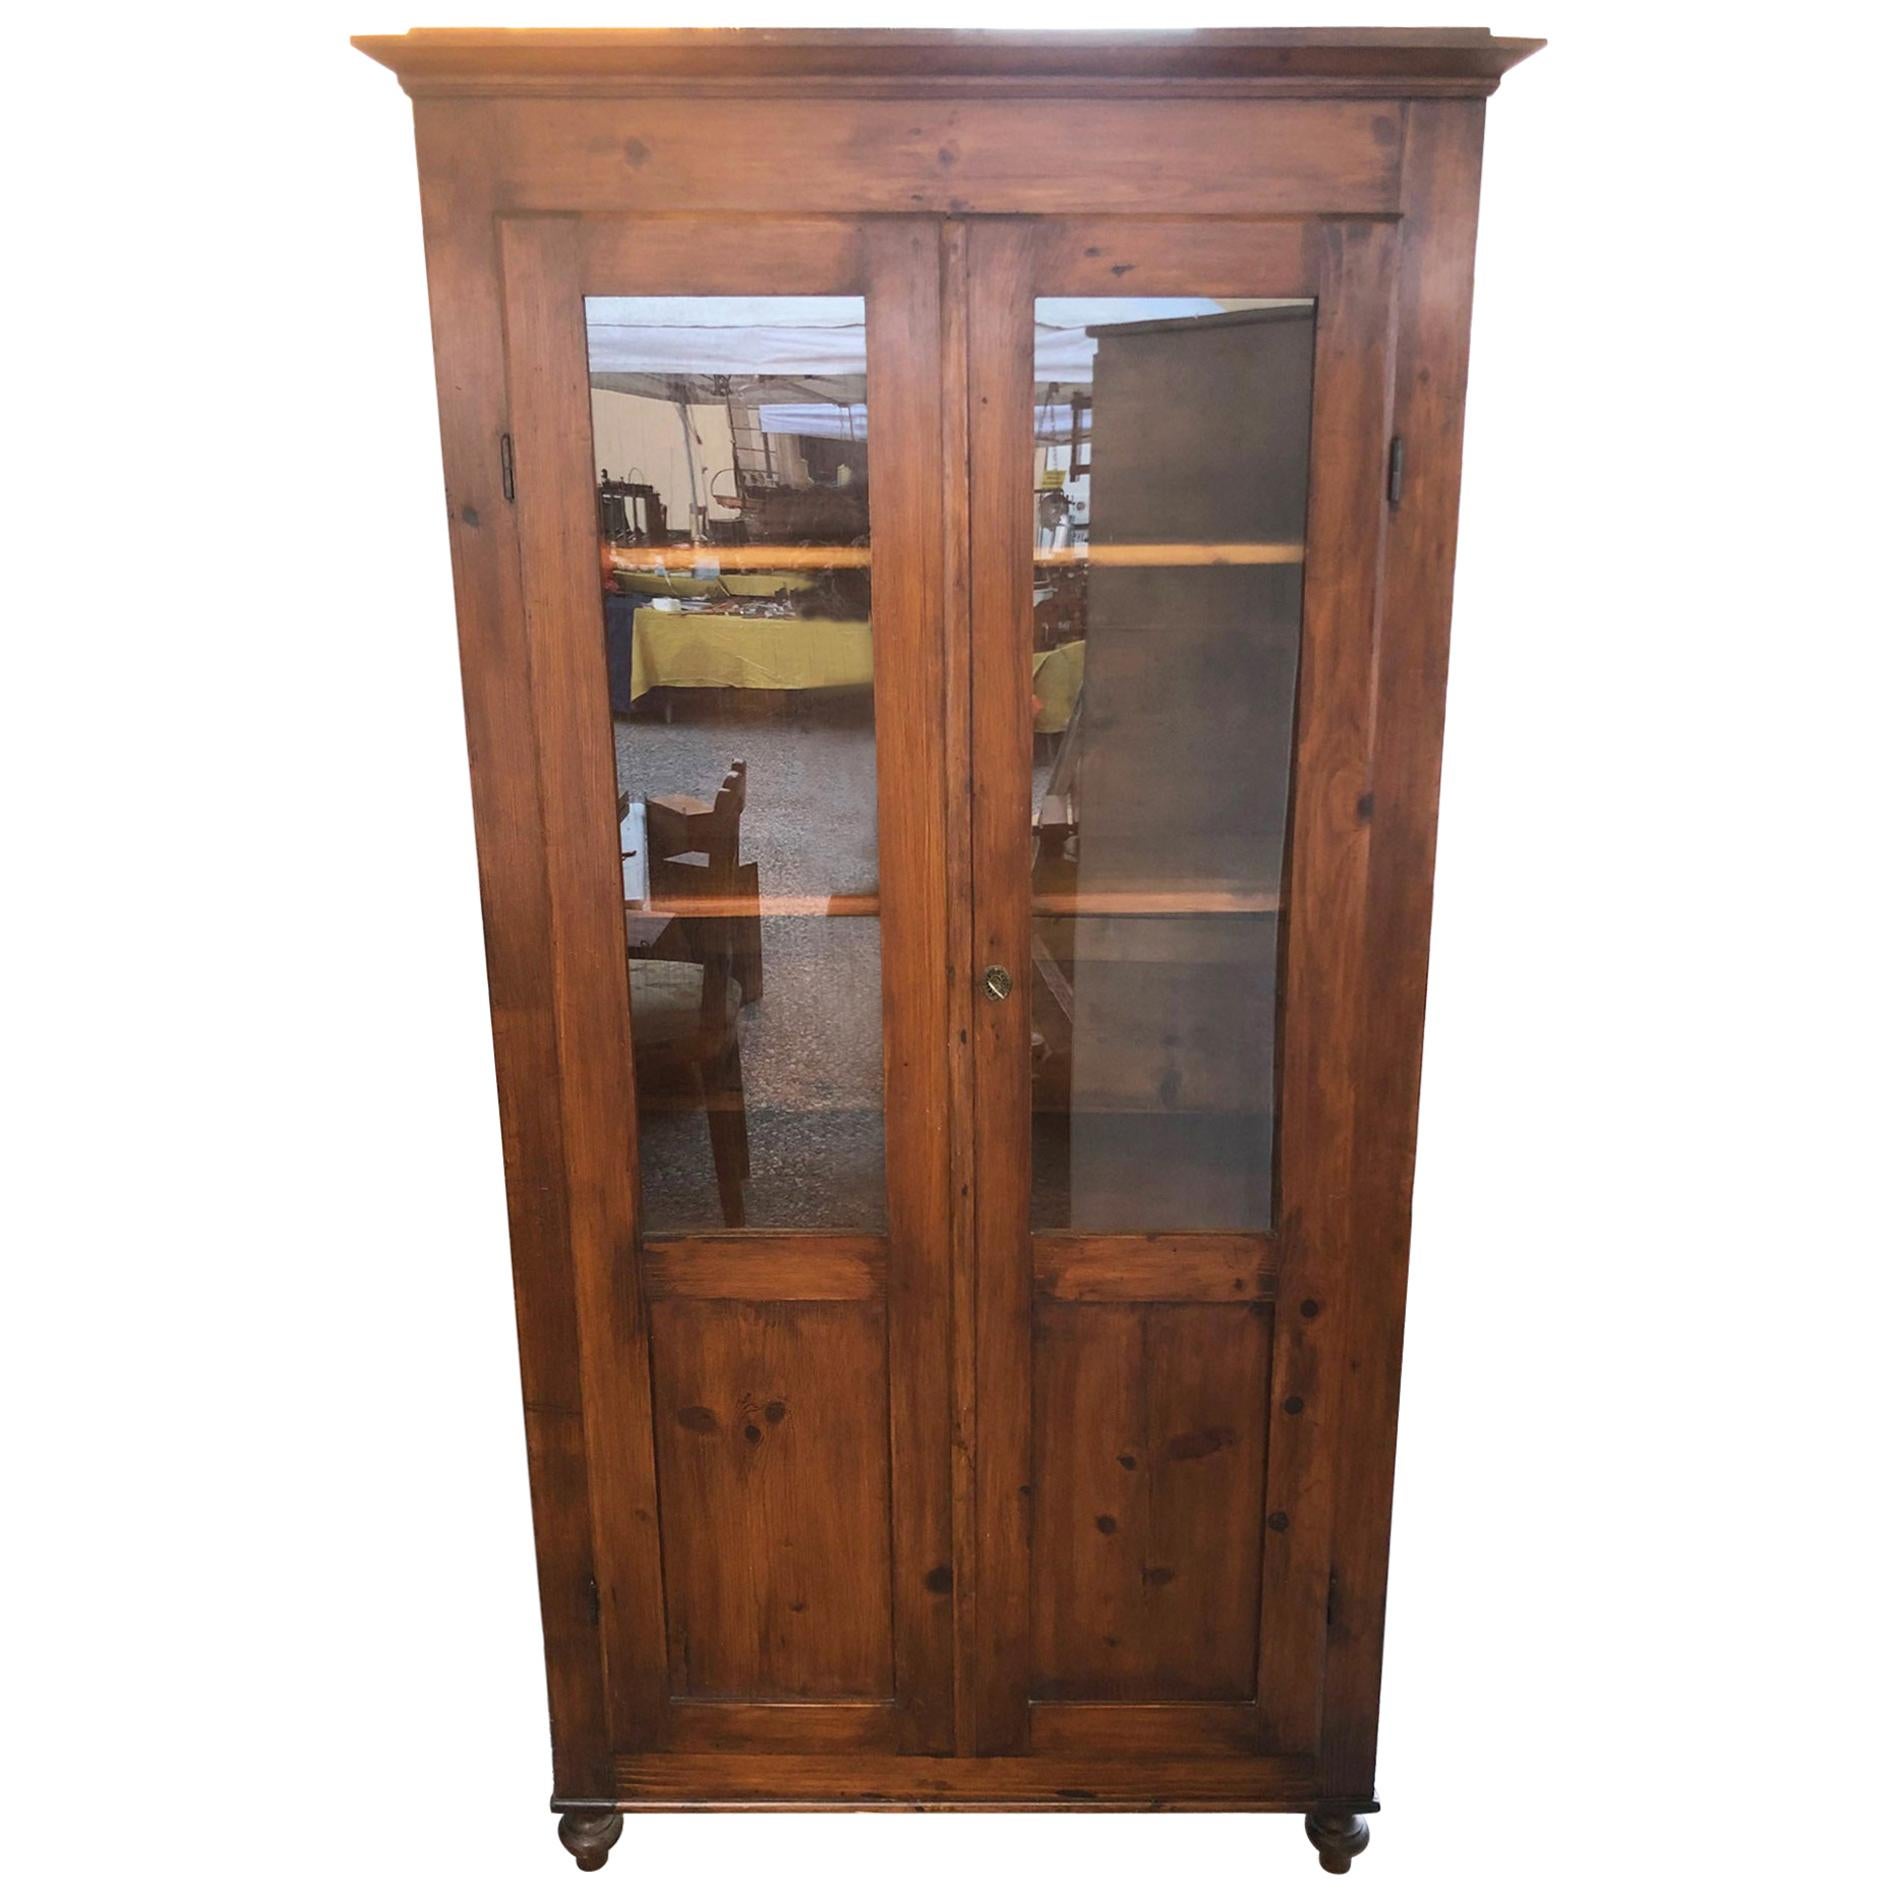 Original Antique Italian Fir Showcase with Two Doors from 1880s, Shelves